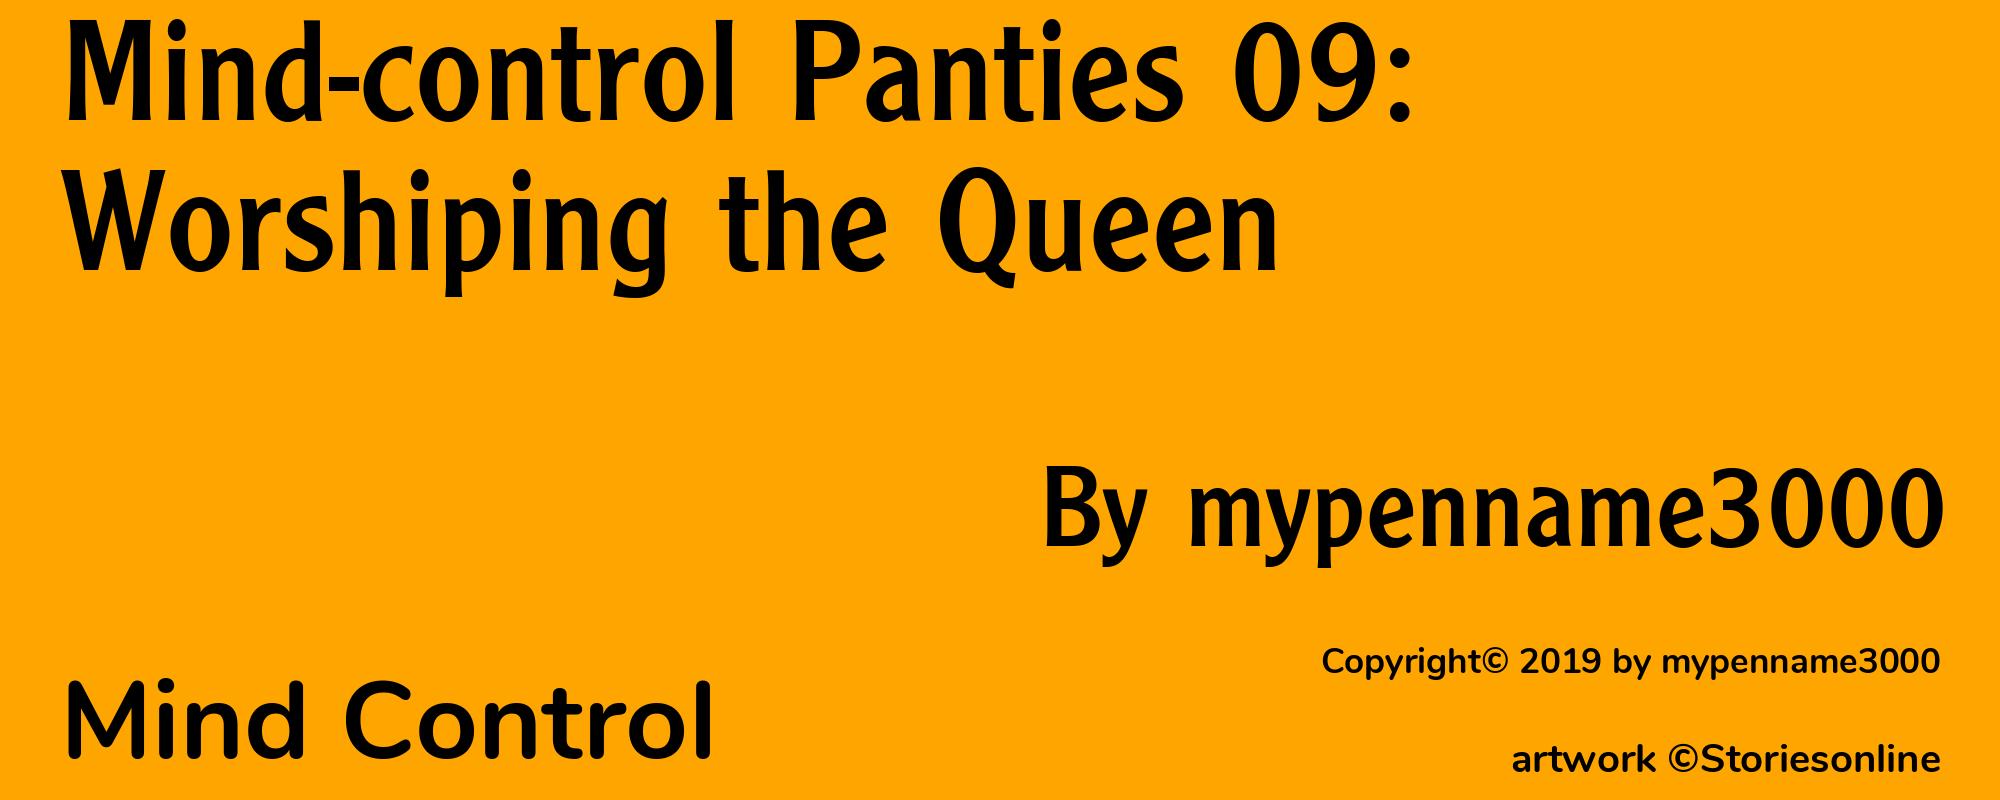 Mind-control Panties 09: Worshiping the Queen - Cover